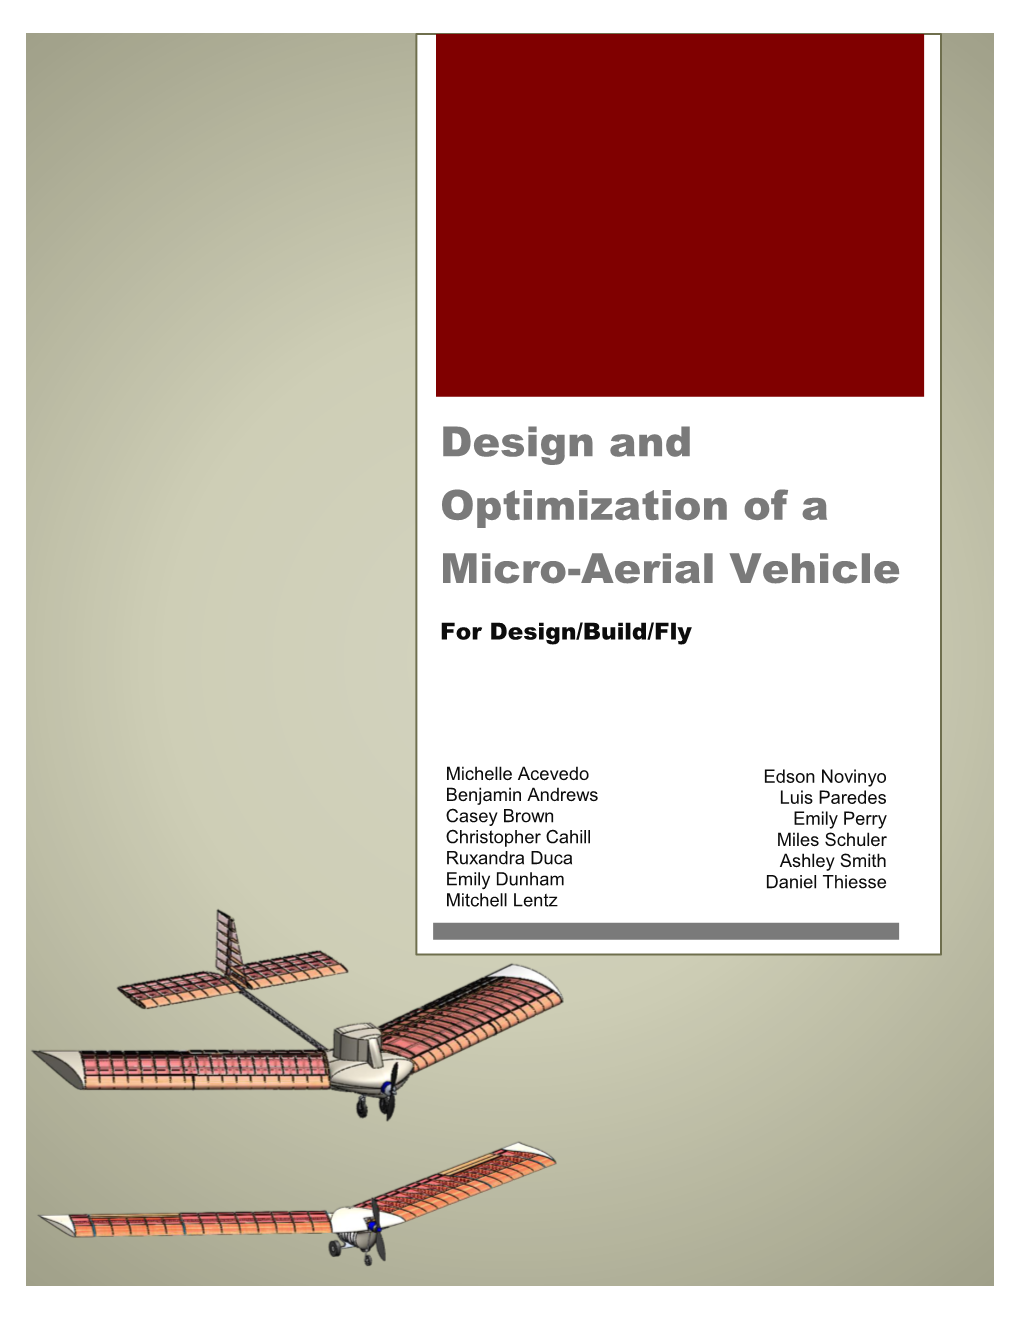 Design and Optimization of a Micro-Aerial Vehicle